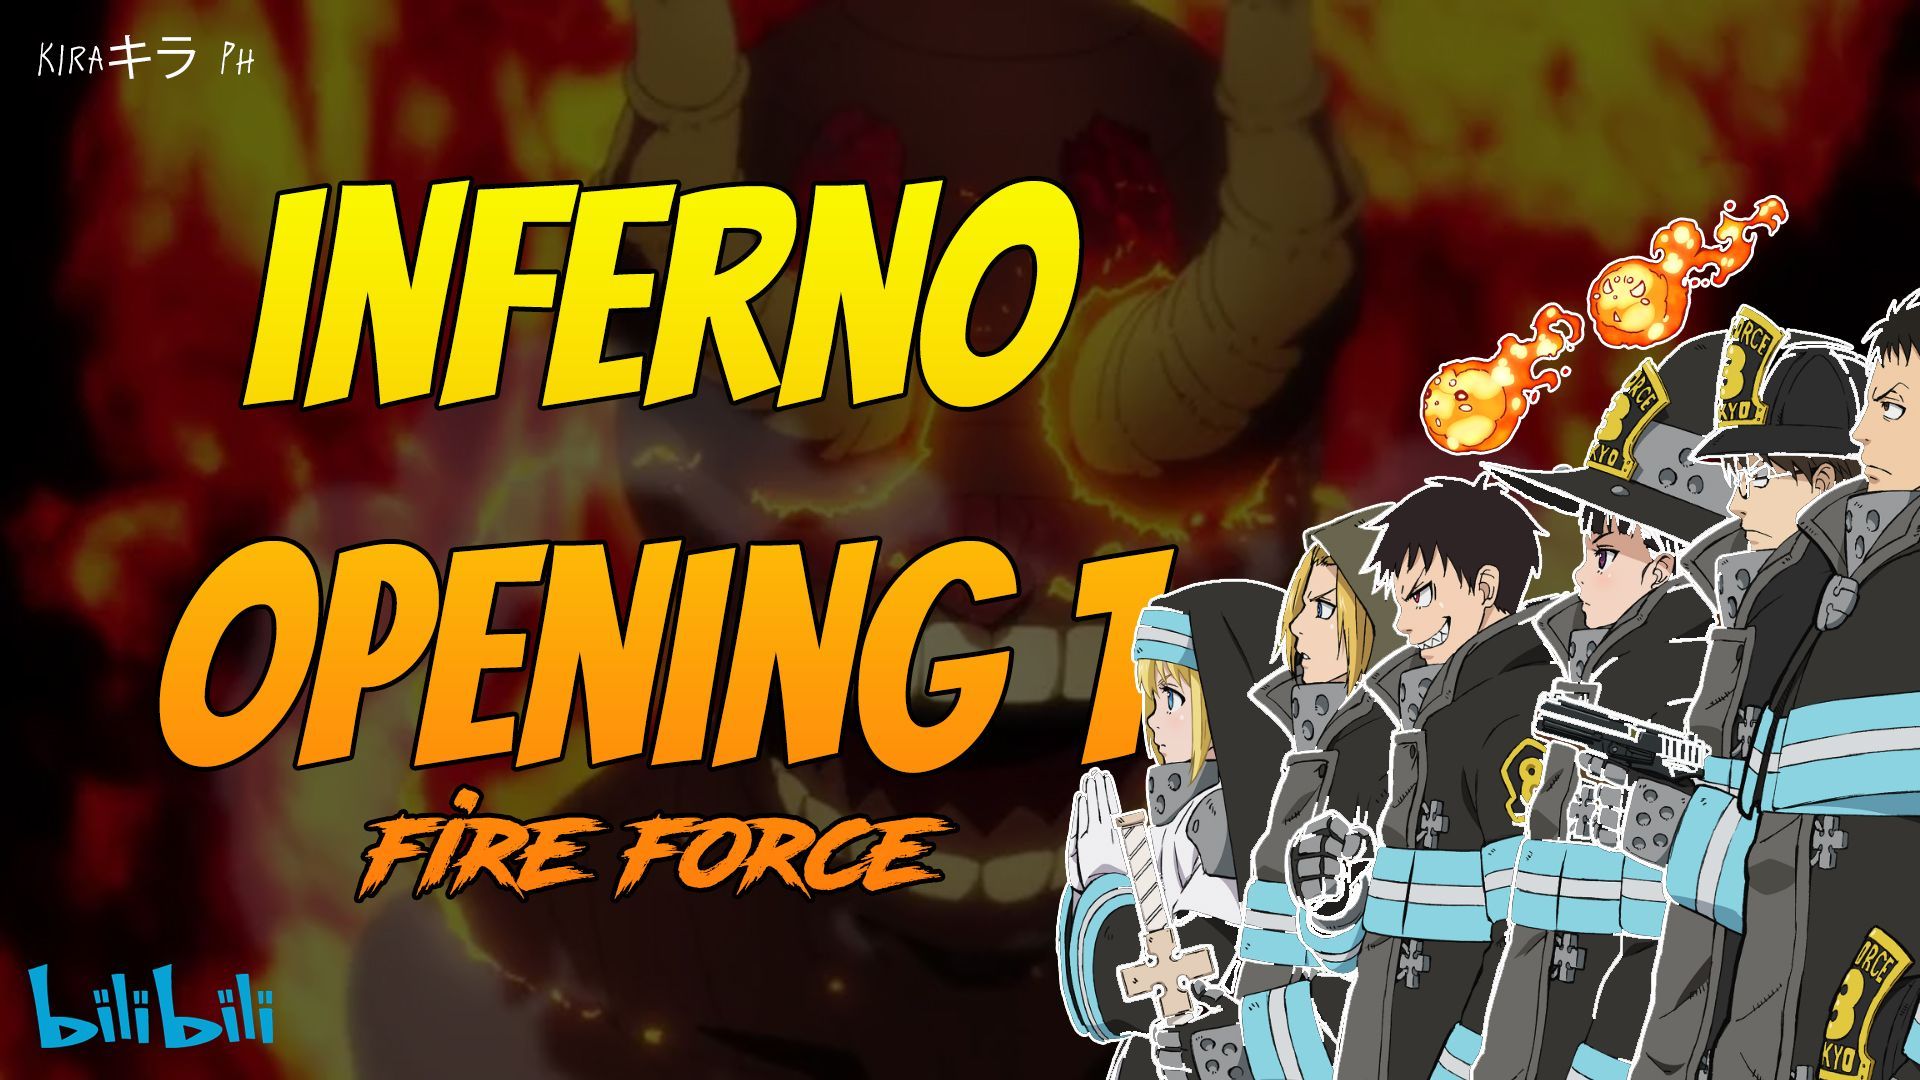 Inferno by Mrs. Green Apple - Fire Force Opening 1 - Bilibili